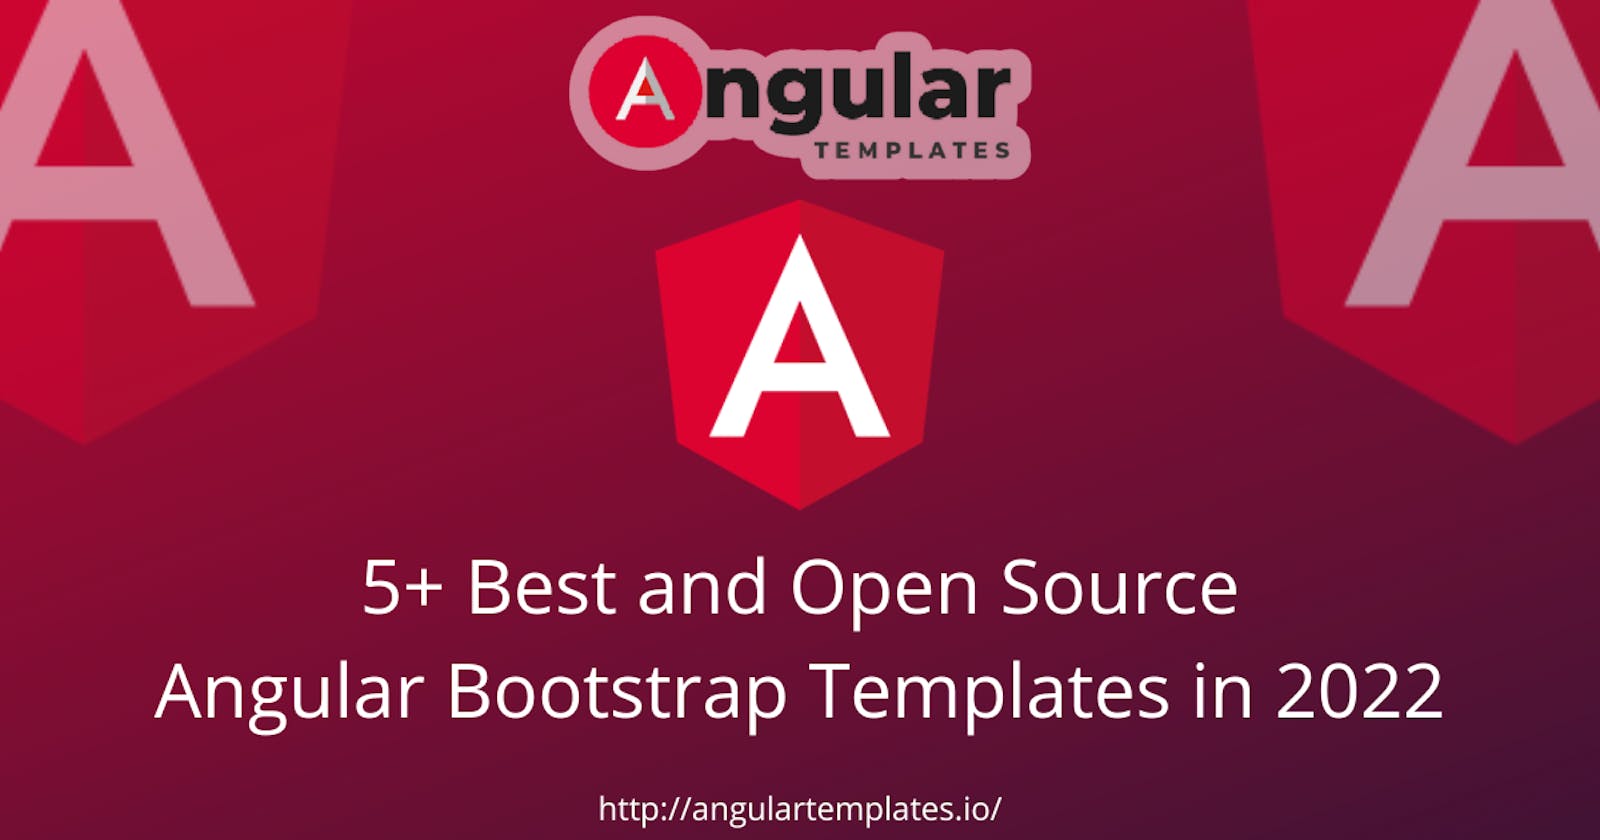 5+ Best and Open source Angular Bootstrap Templates in 2022